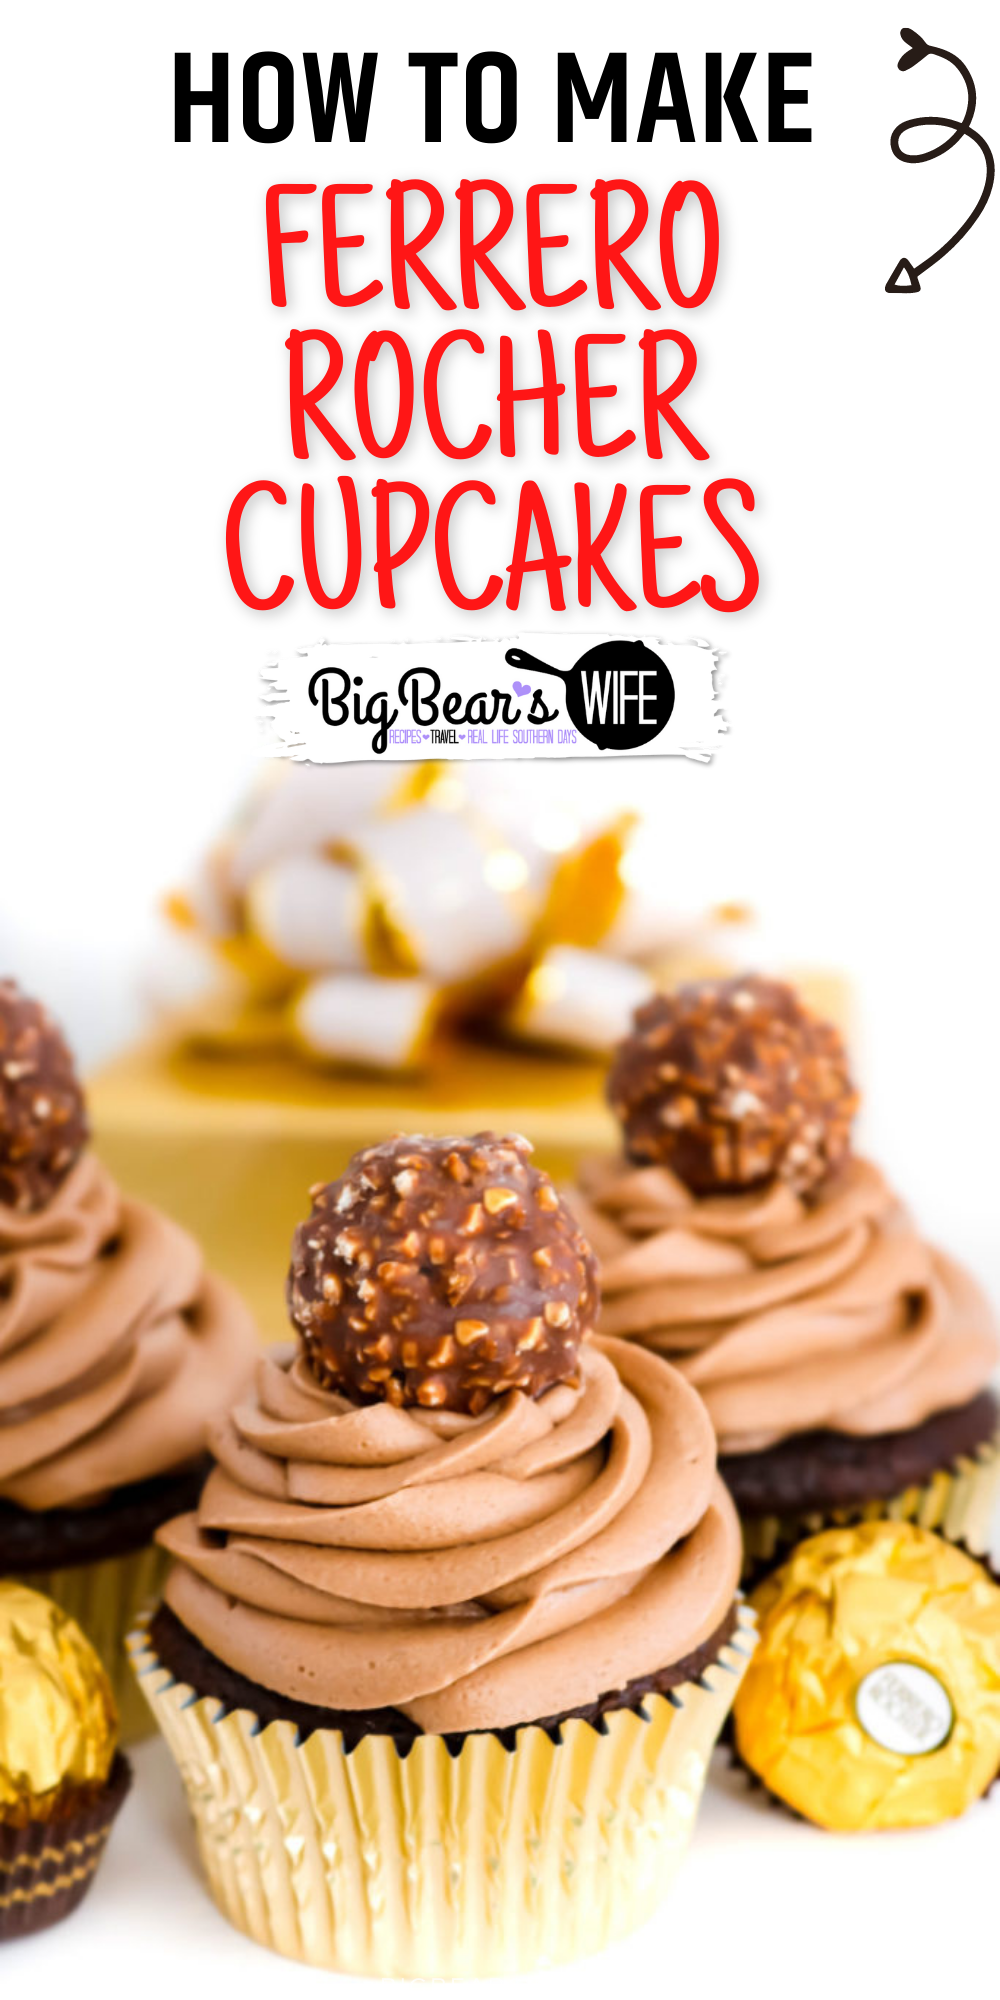 Love Ferrero Rocher Candies? Then these Ferrero Rocher Cupcakes are going to be your new favorite dessert! Homemade Chocolate cupcakes with a chocolate hazelnut frosting is topped with a Ferrero Rocher Chocolate and dressed in a gold cupcake liner for the most elegant cupcake ever.  via @bigbearswife